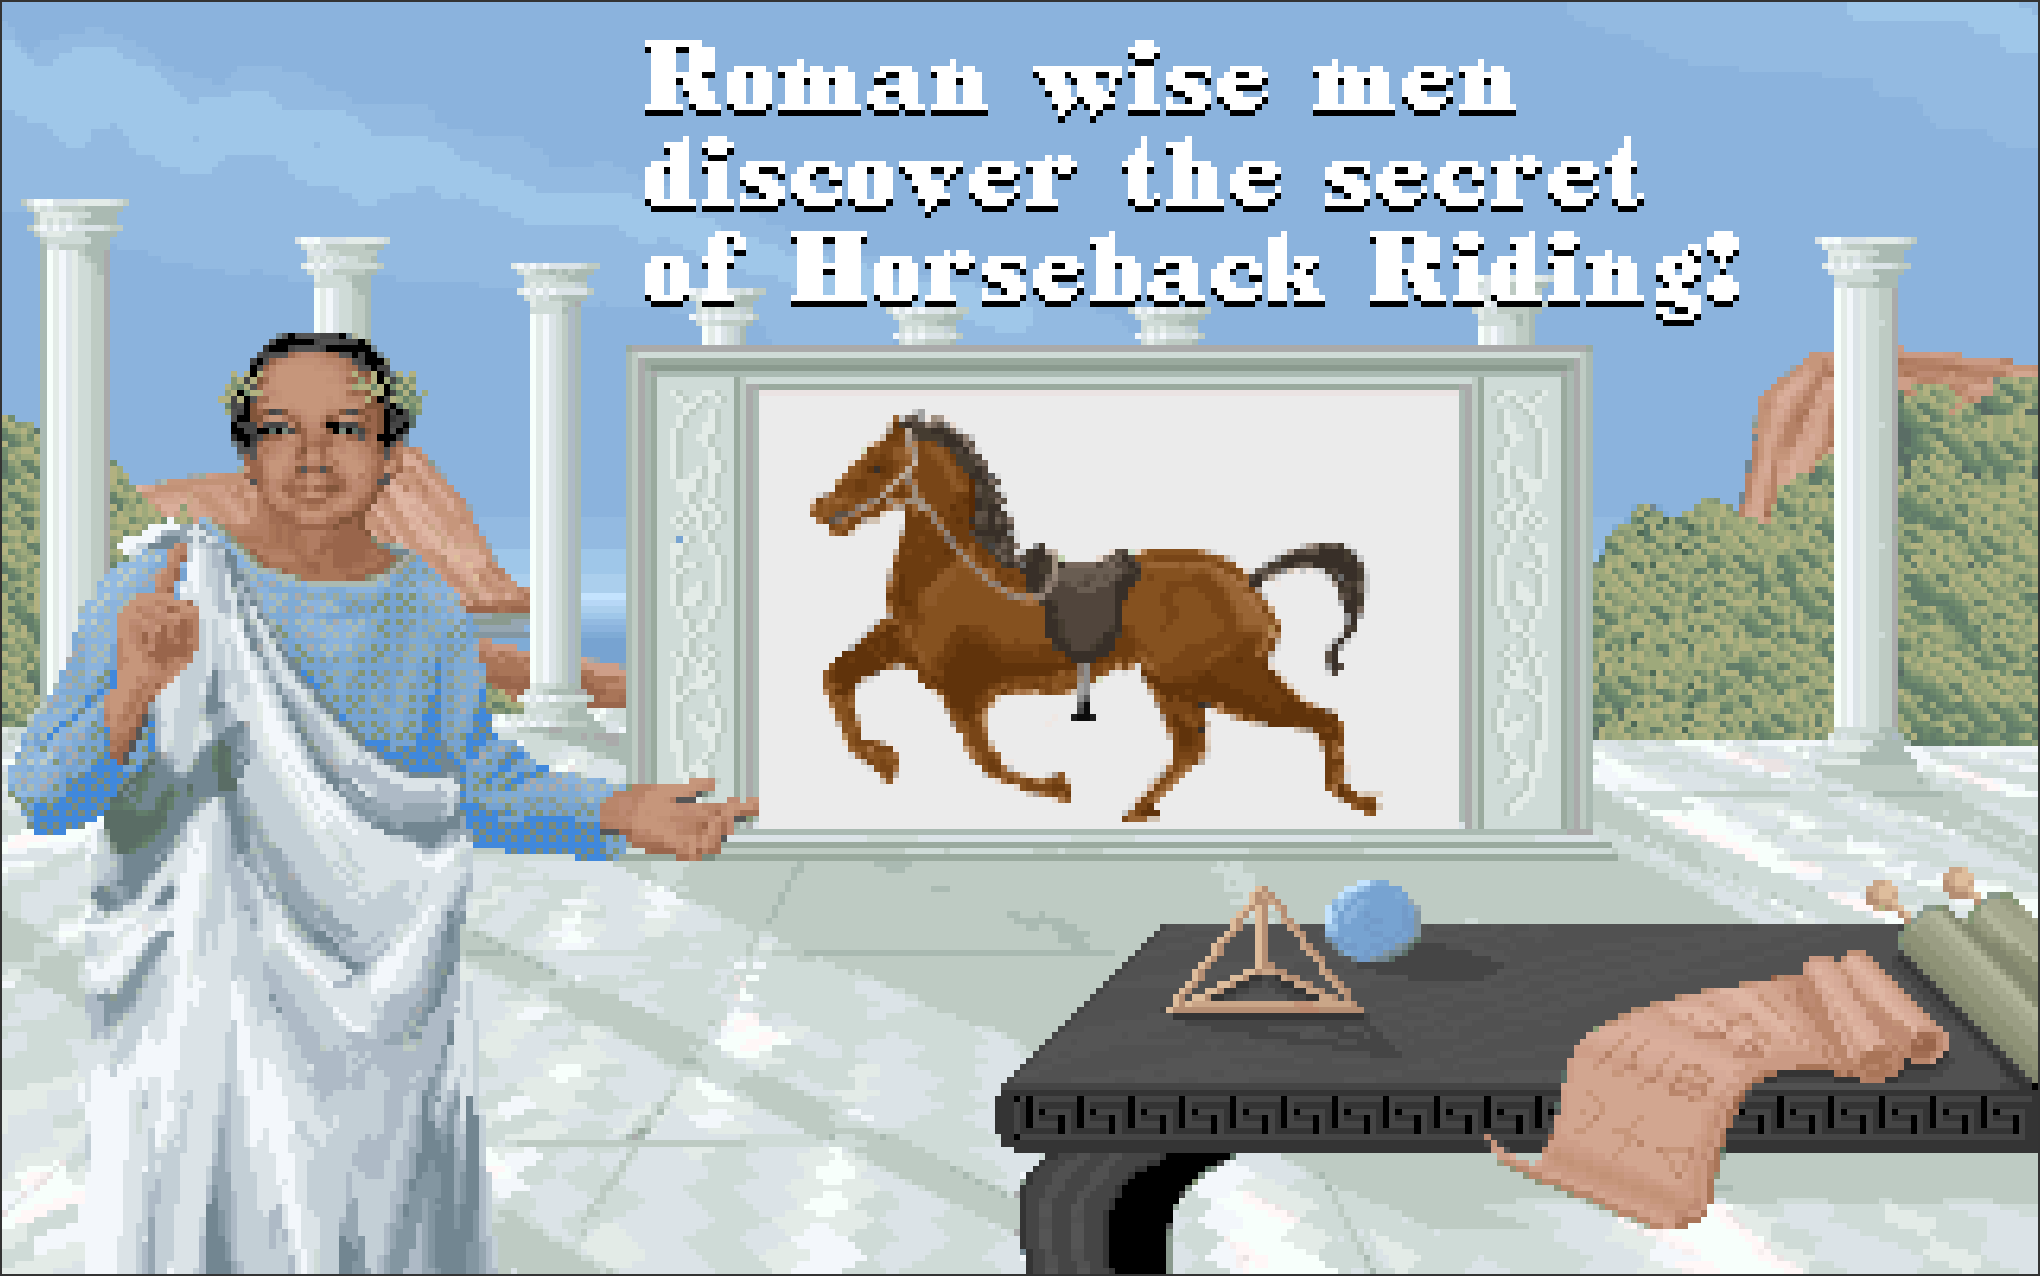 A screenshot of the technology 'Horseback Riding' from the computer game Civilization.